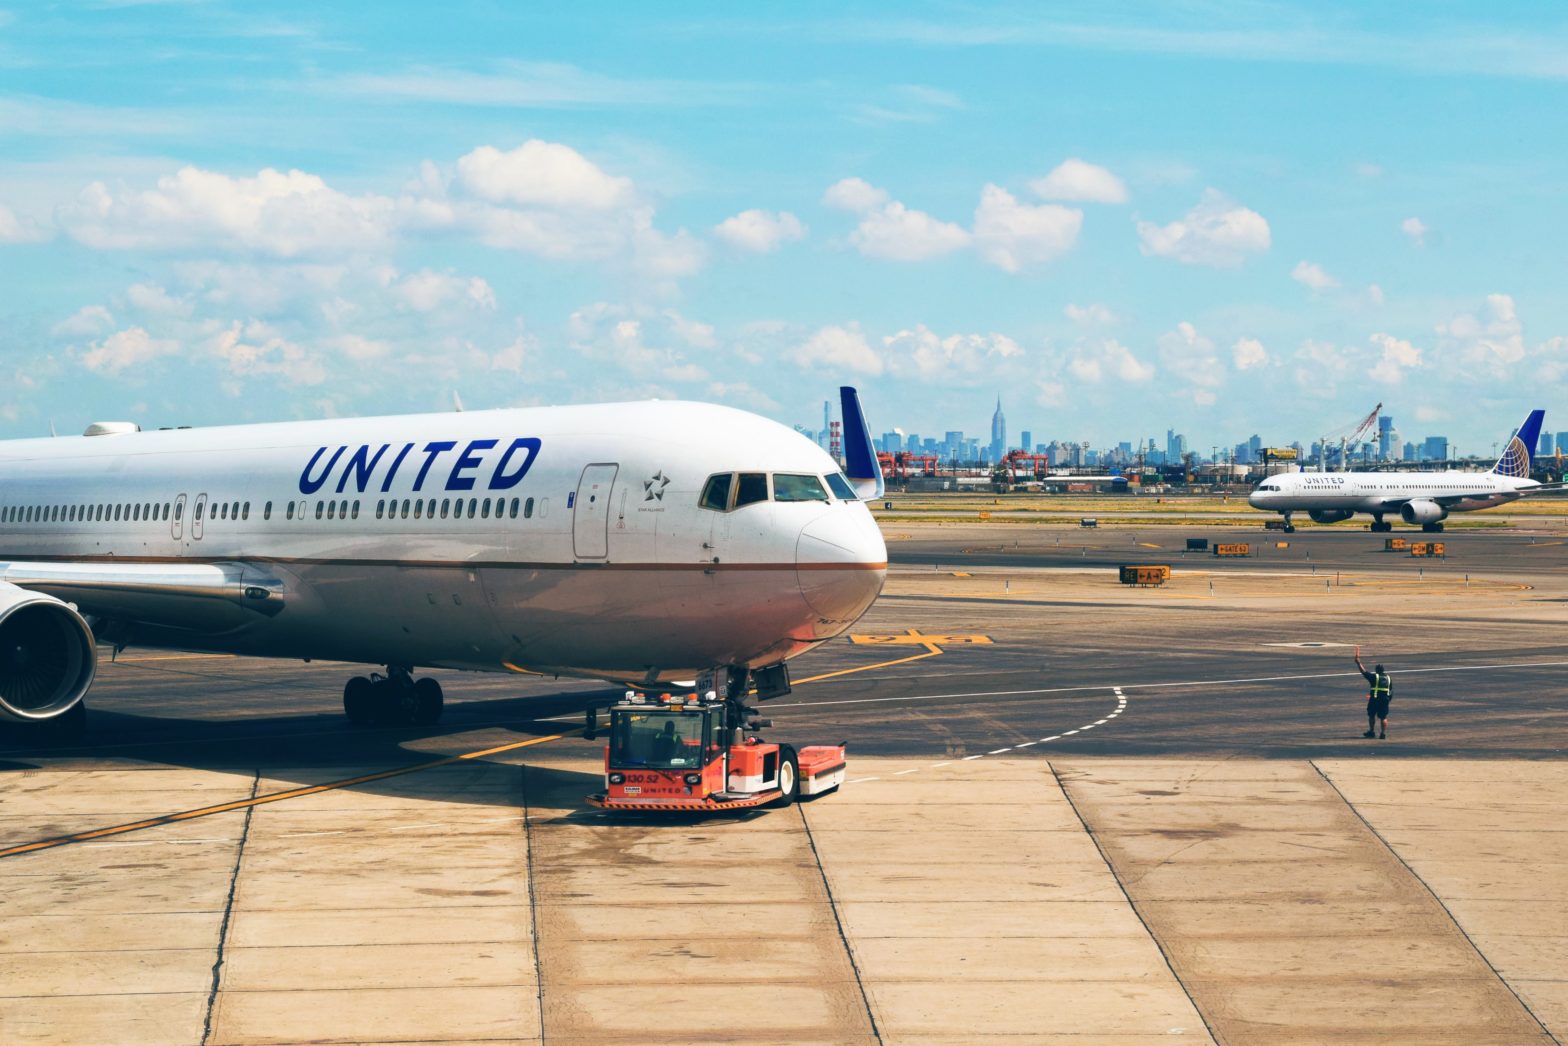 Yikes! United Airlines Flight Has Navigational Failure While Airborne